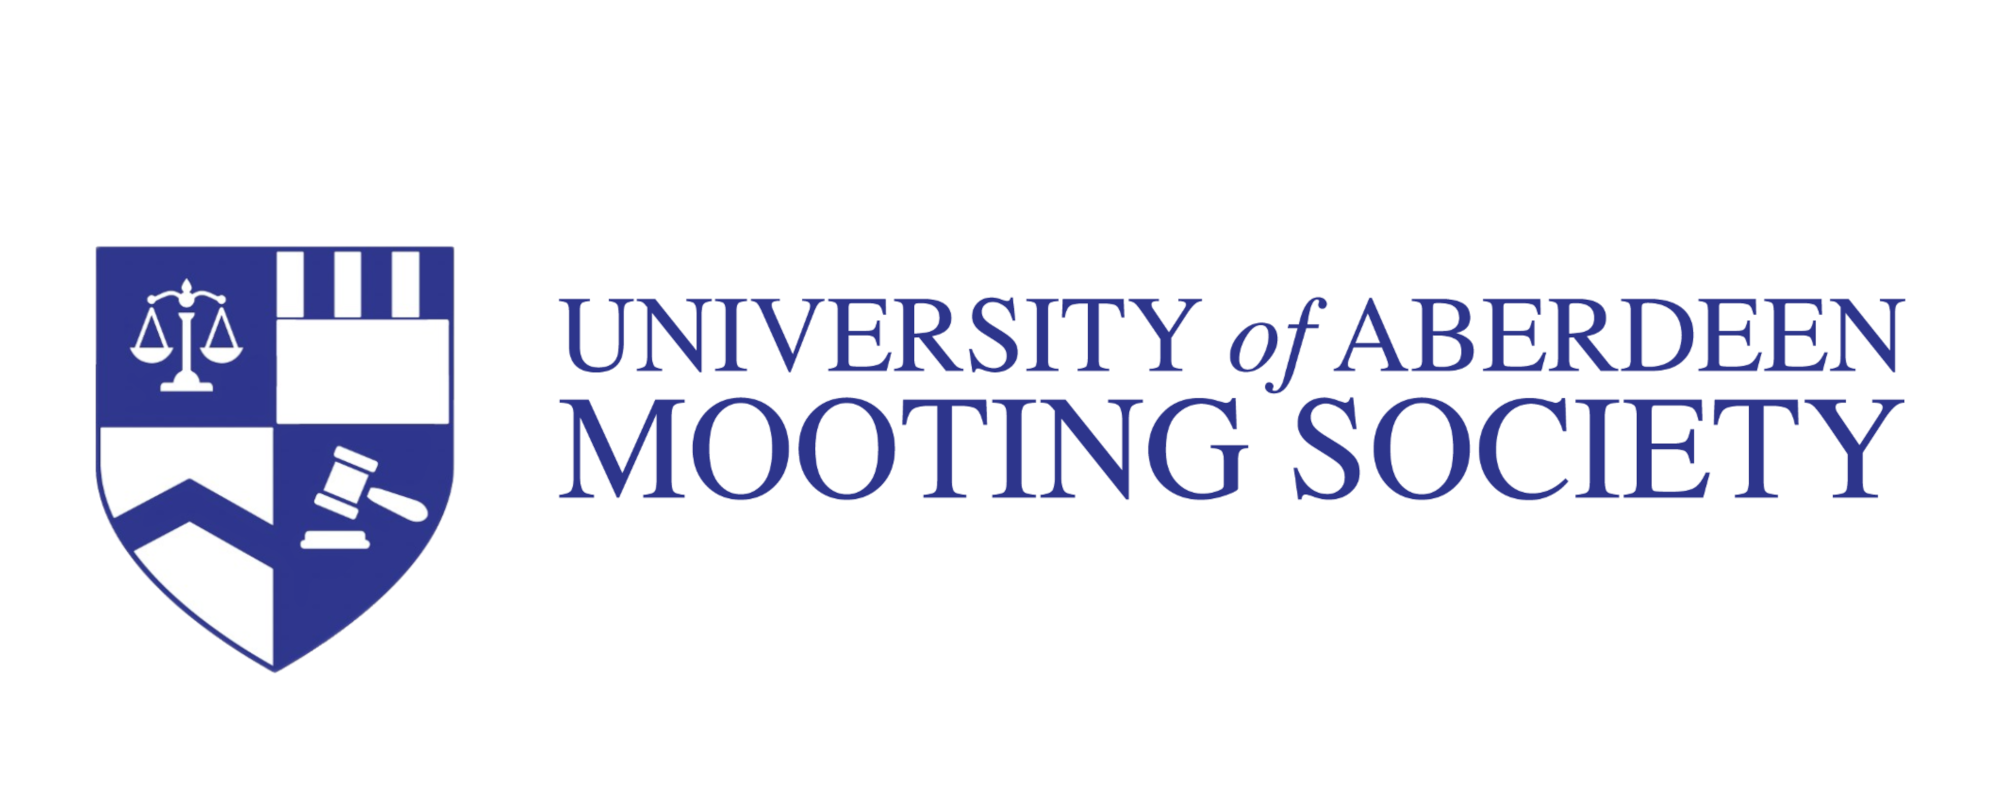 Aberdeen University moot final to be held on Thursday